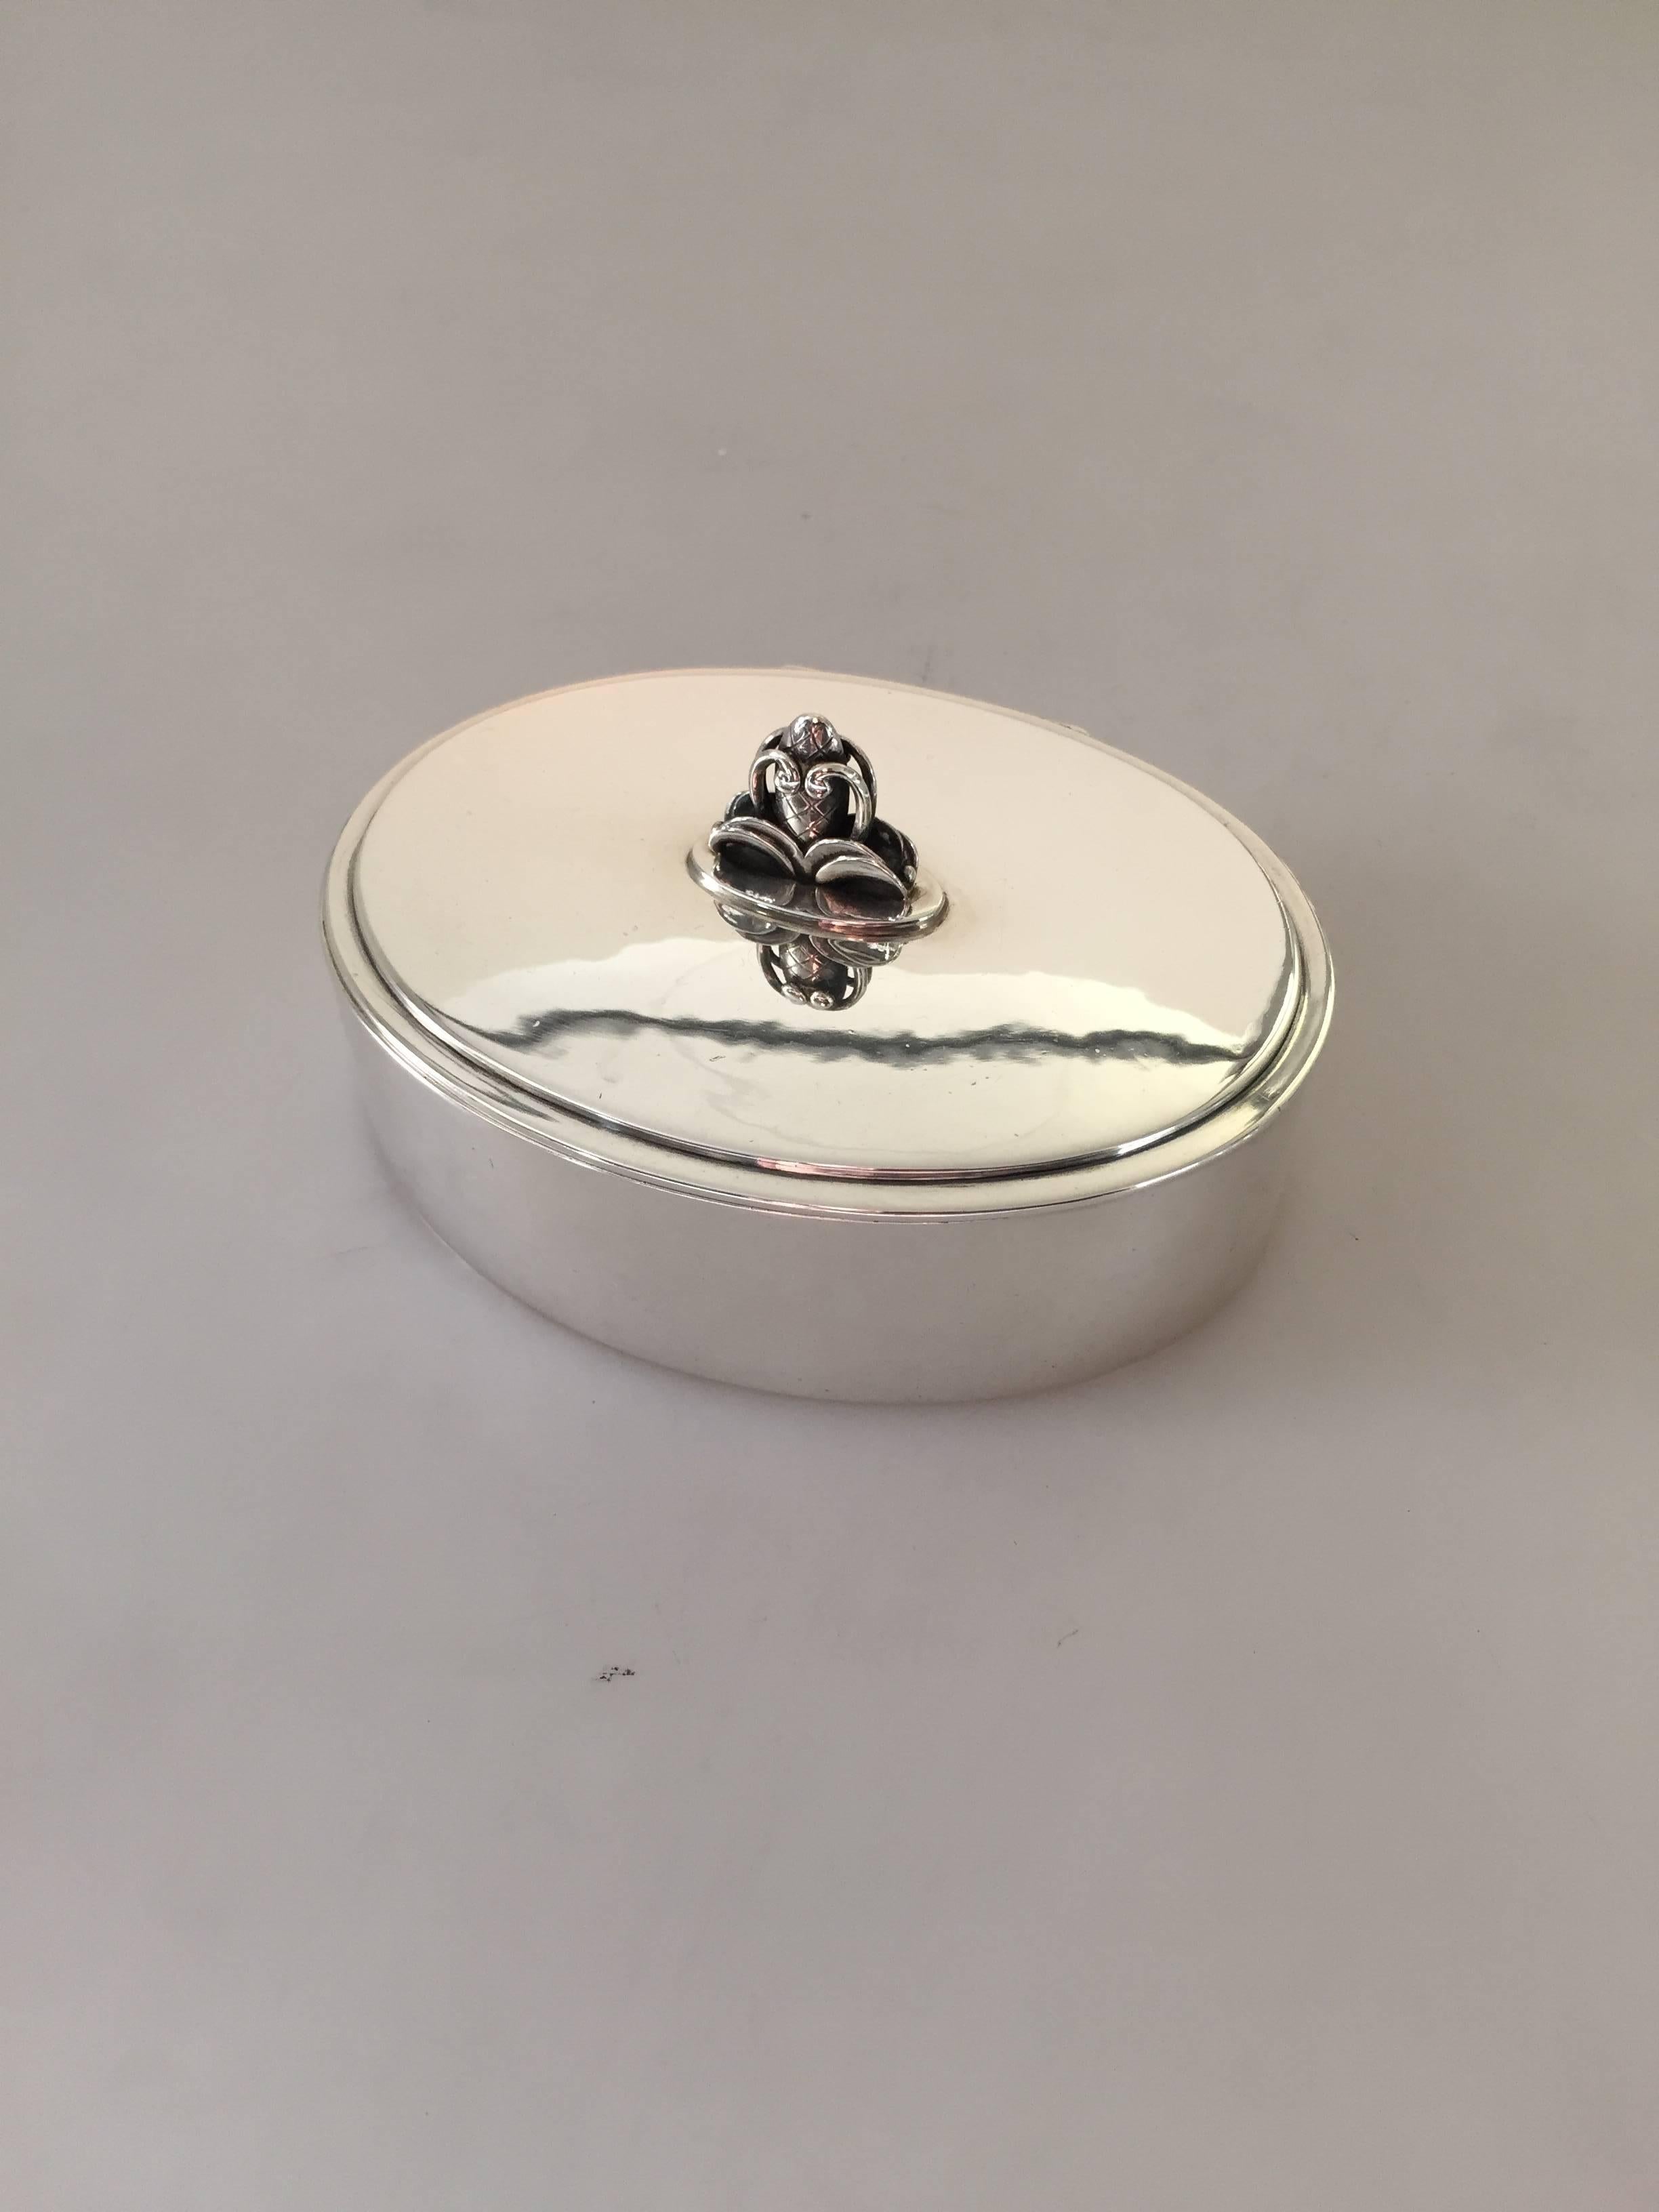 Georg Jensen Sterling Silver Oval Box with Mirror #172. With post 1945 marks. 

Weighs 273 g / 9.65 oz. 
Measures 3.5 cm high, 12 cm long, 9 cm wide (1 8/3